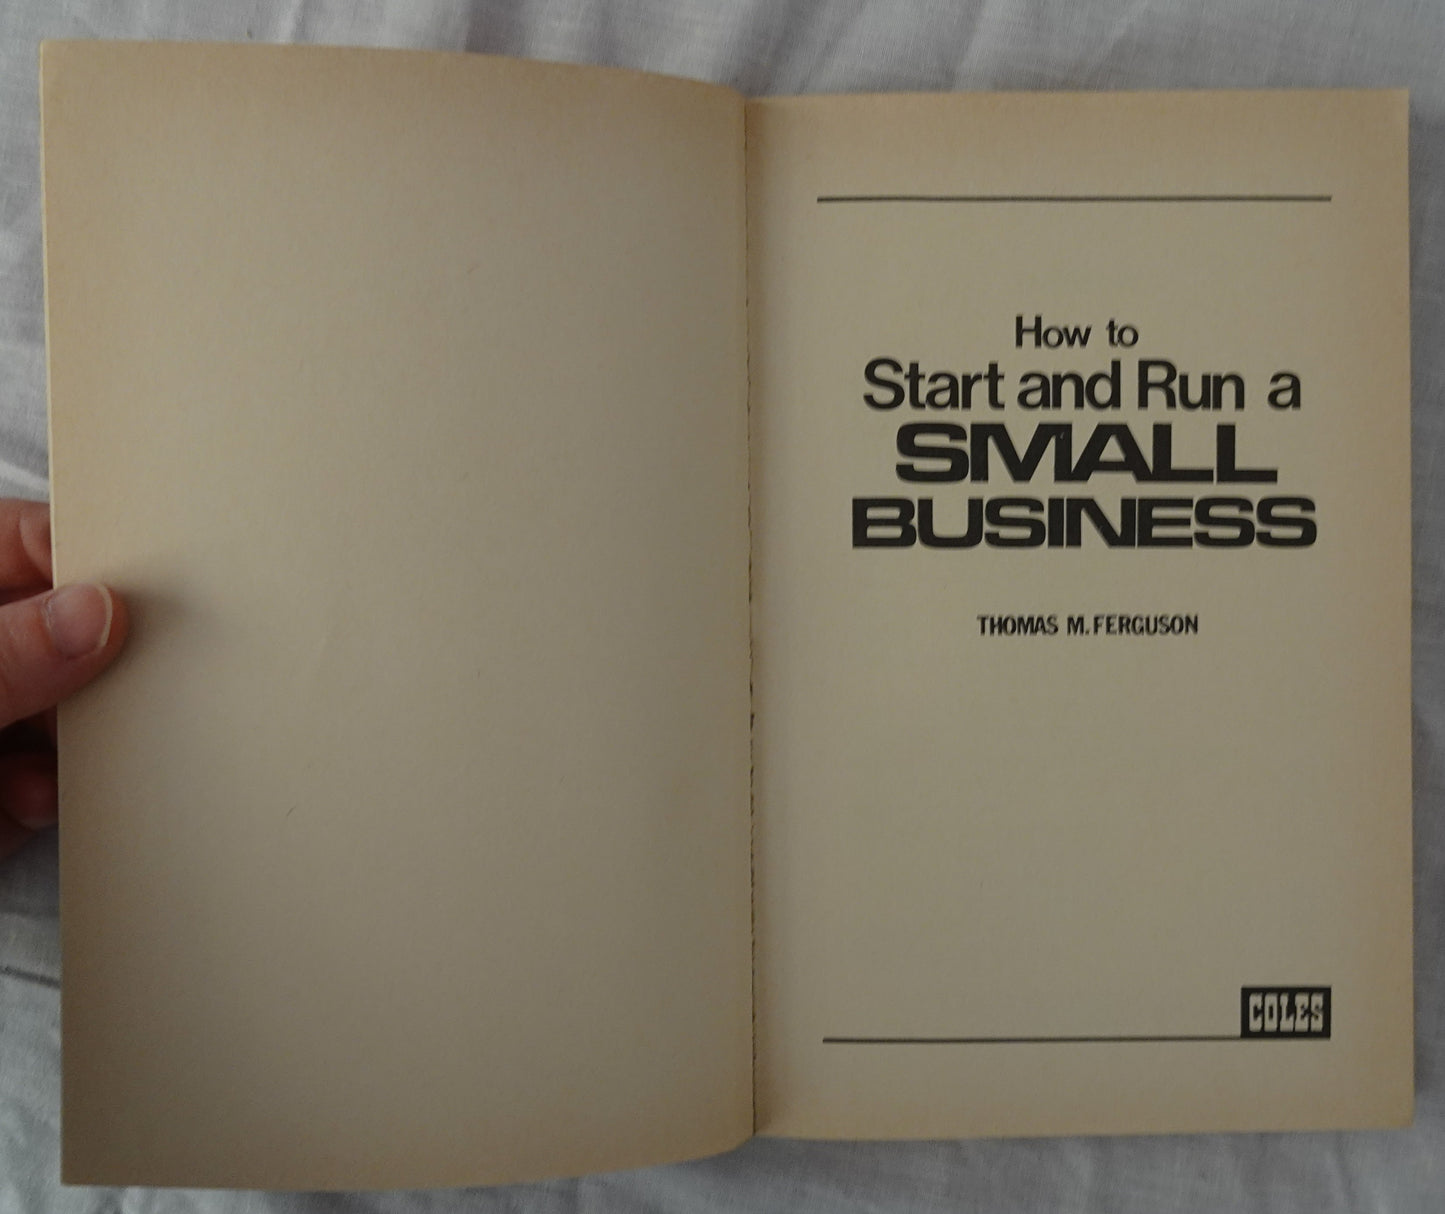 How to Start and Run a Small Business by Thomas M. Ferguson